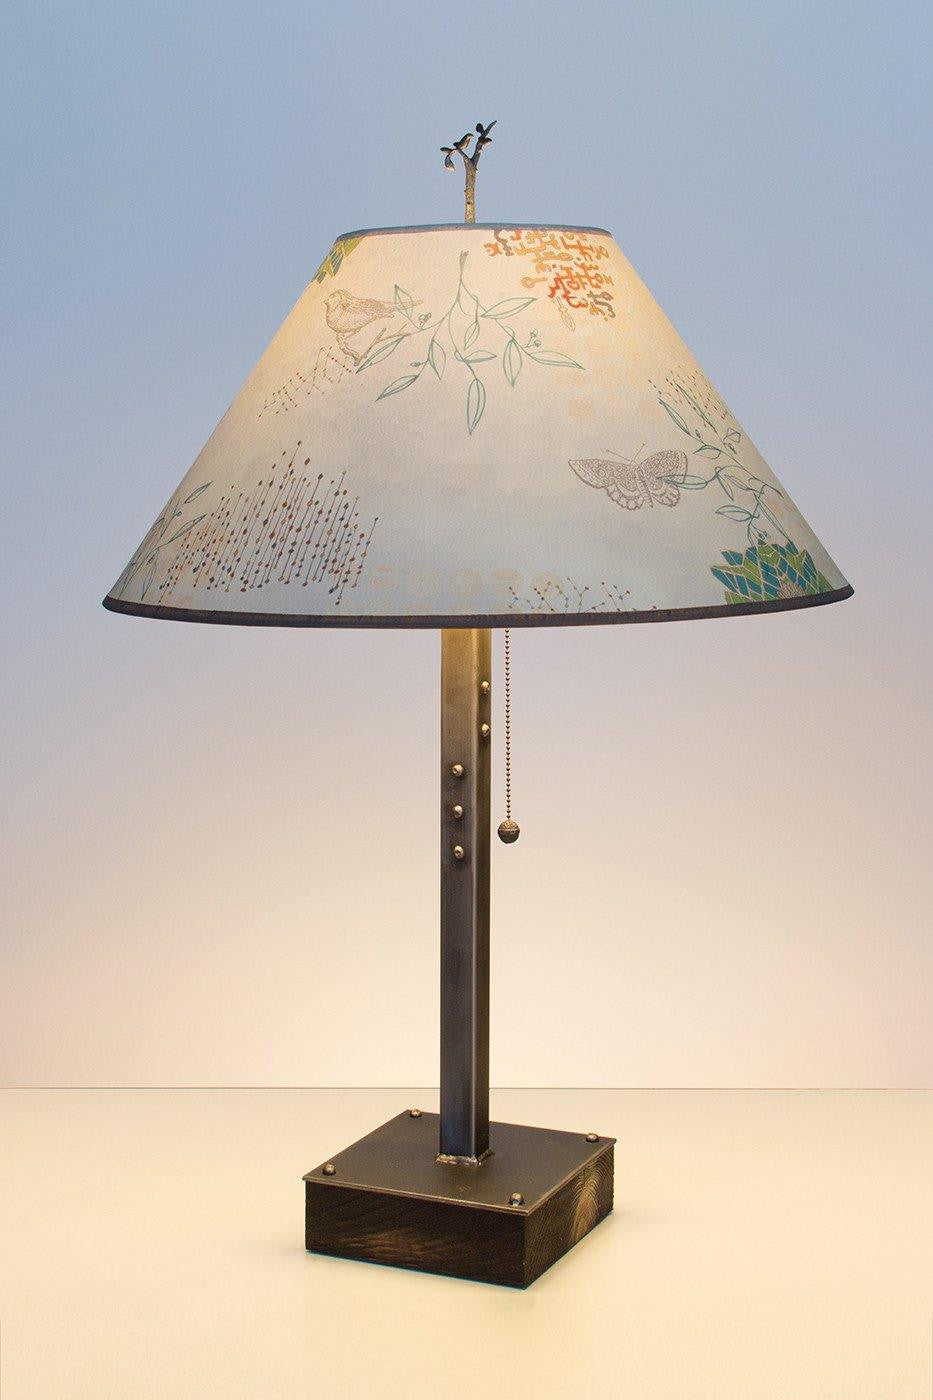 Steel Table Lamp on Wood with Large Conical Shade in Ecru Journey